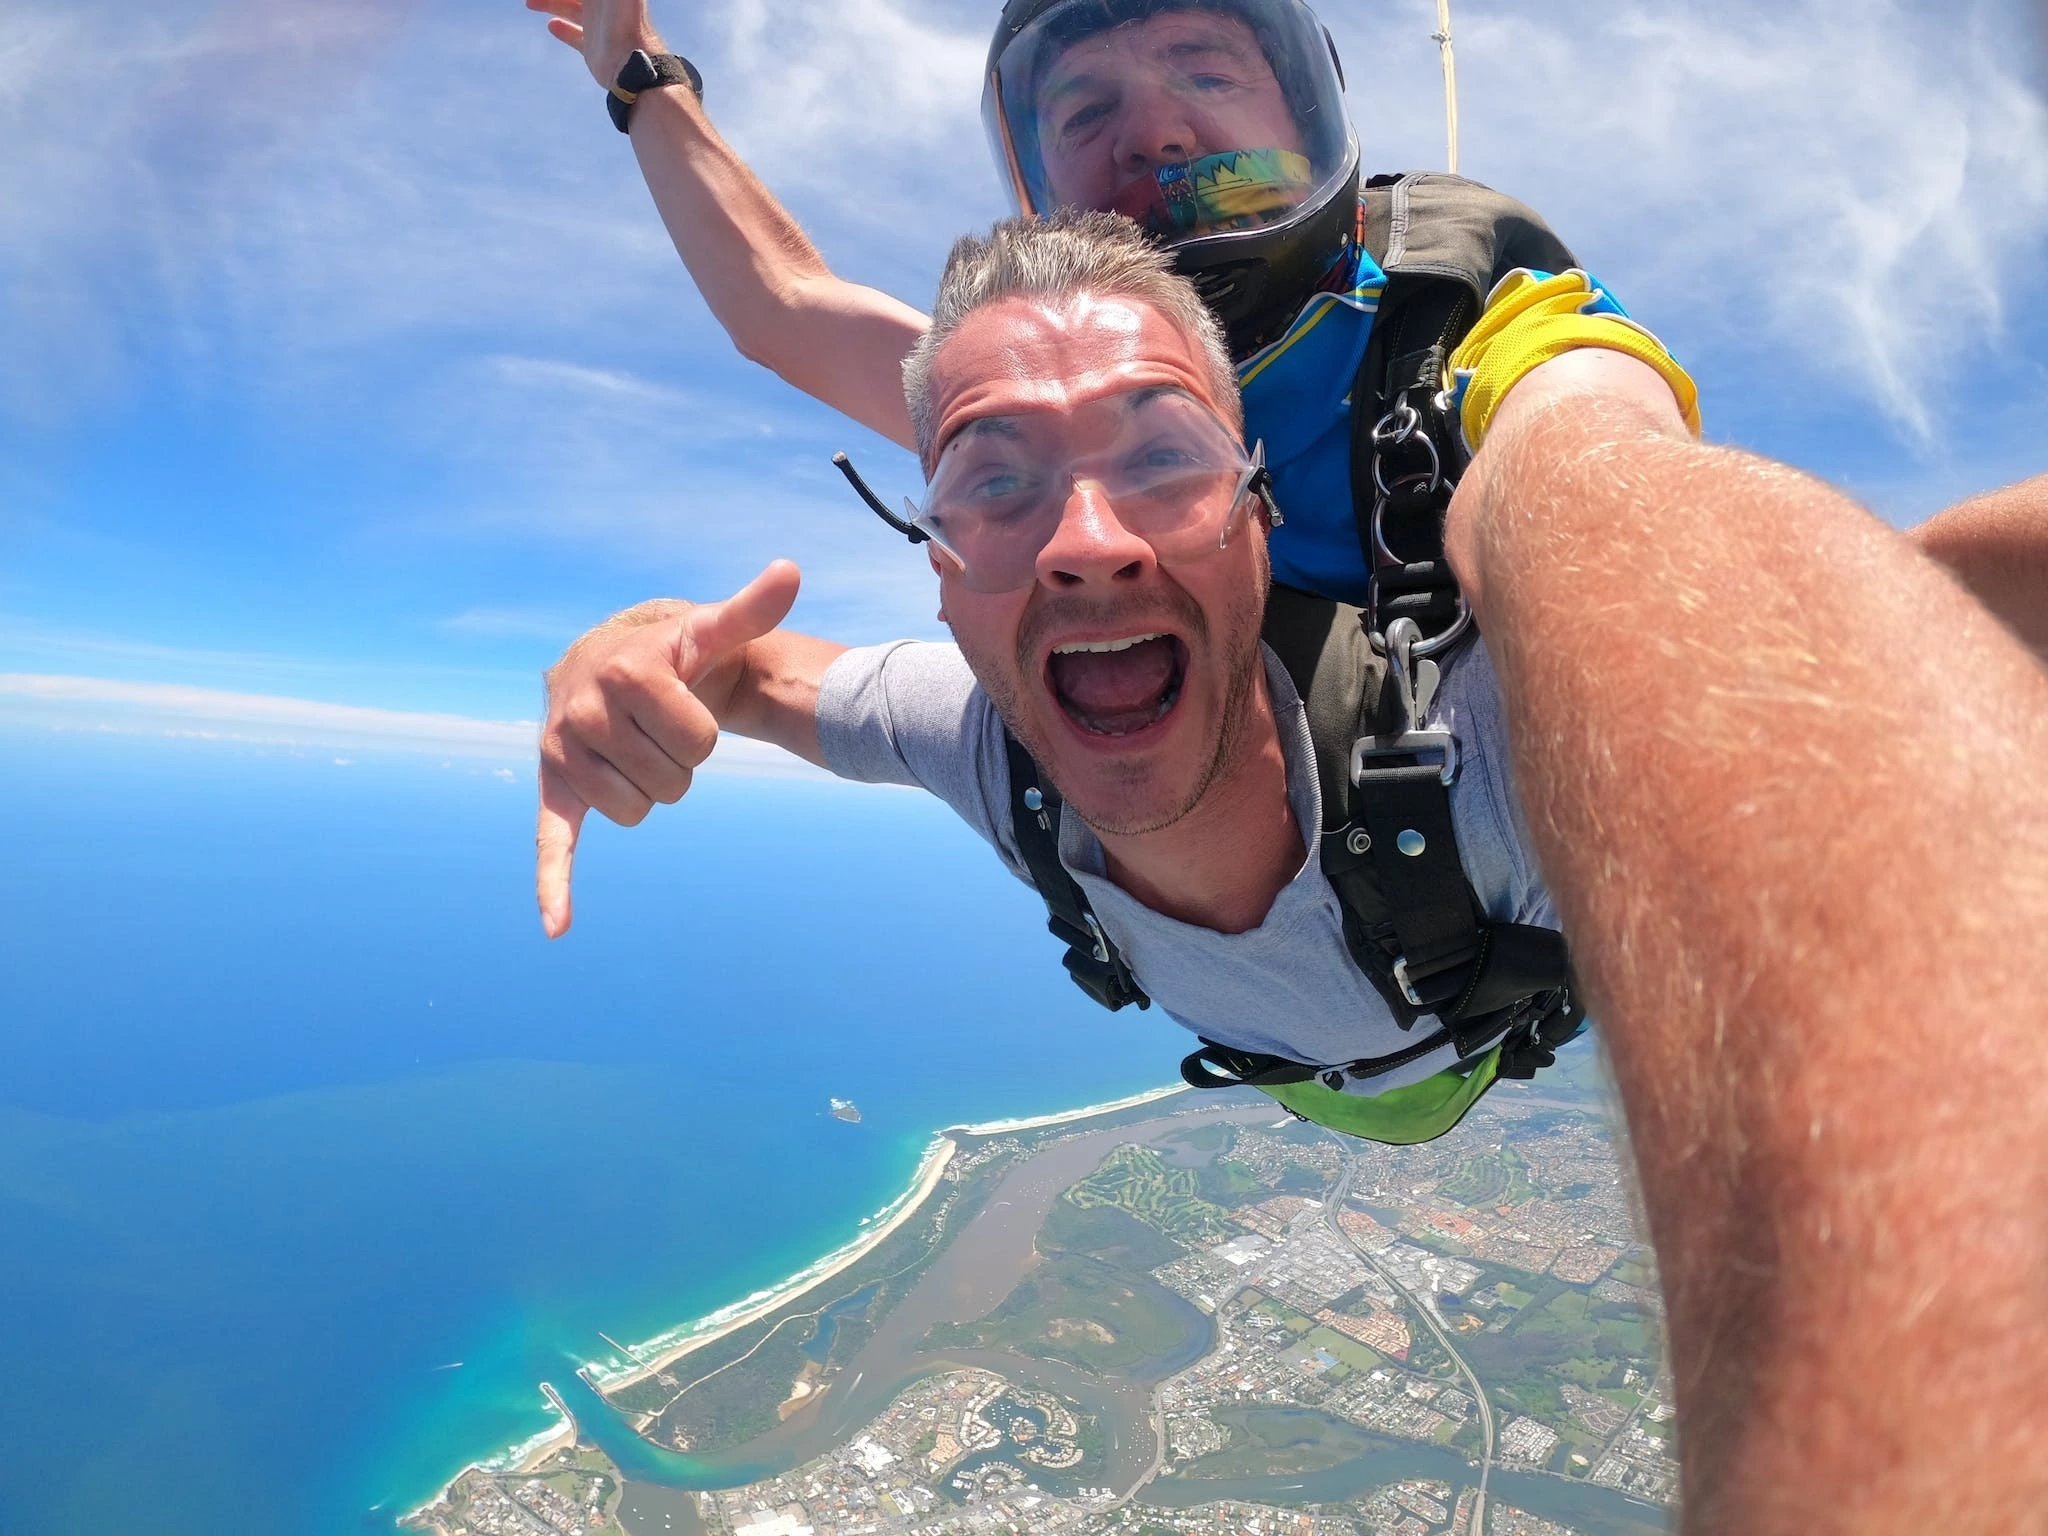 Free fall with Gold Coast Skydive